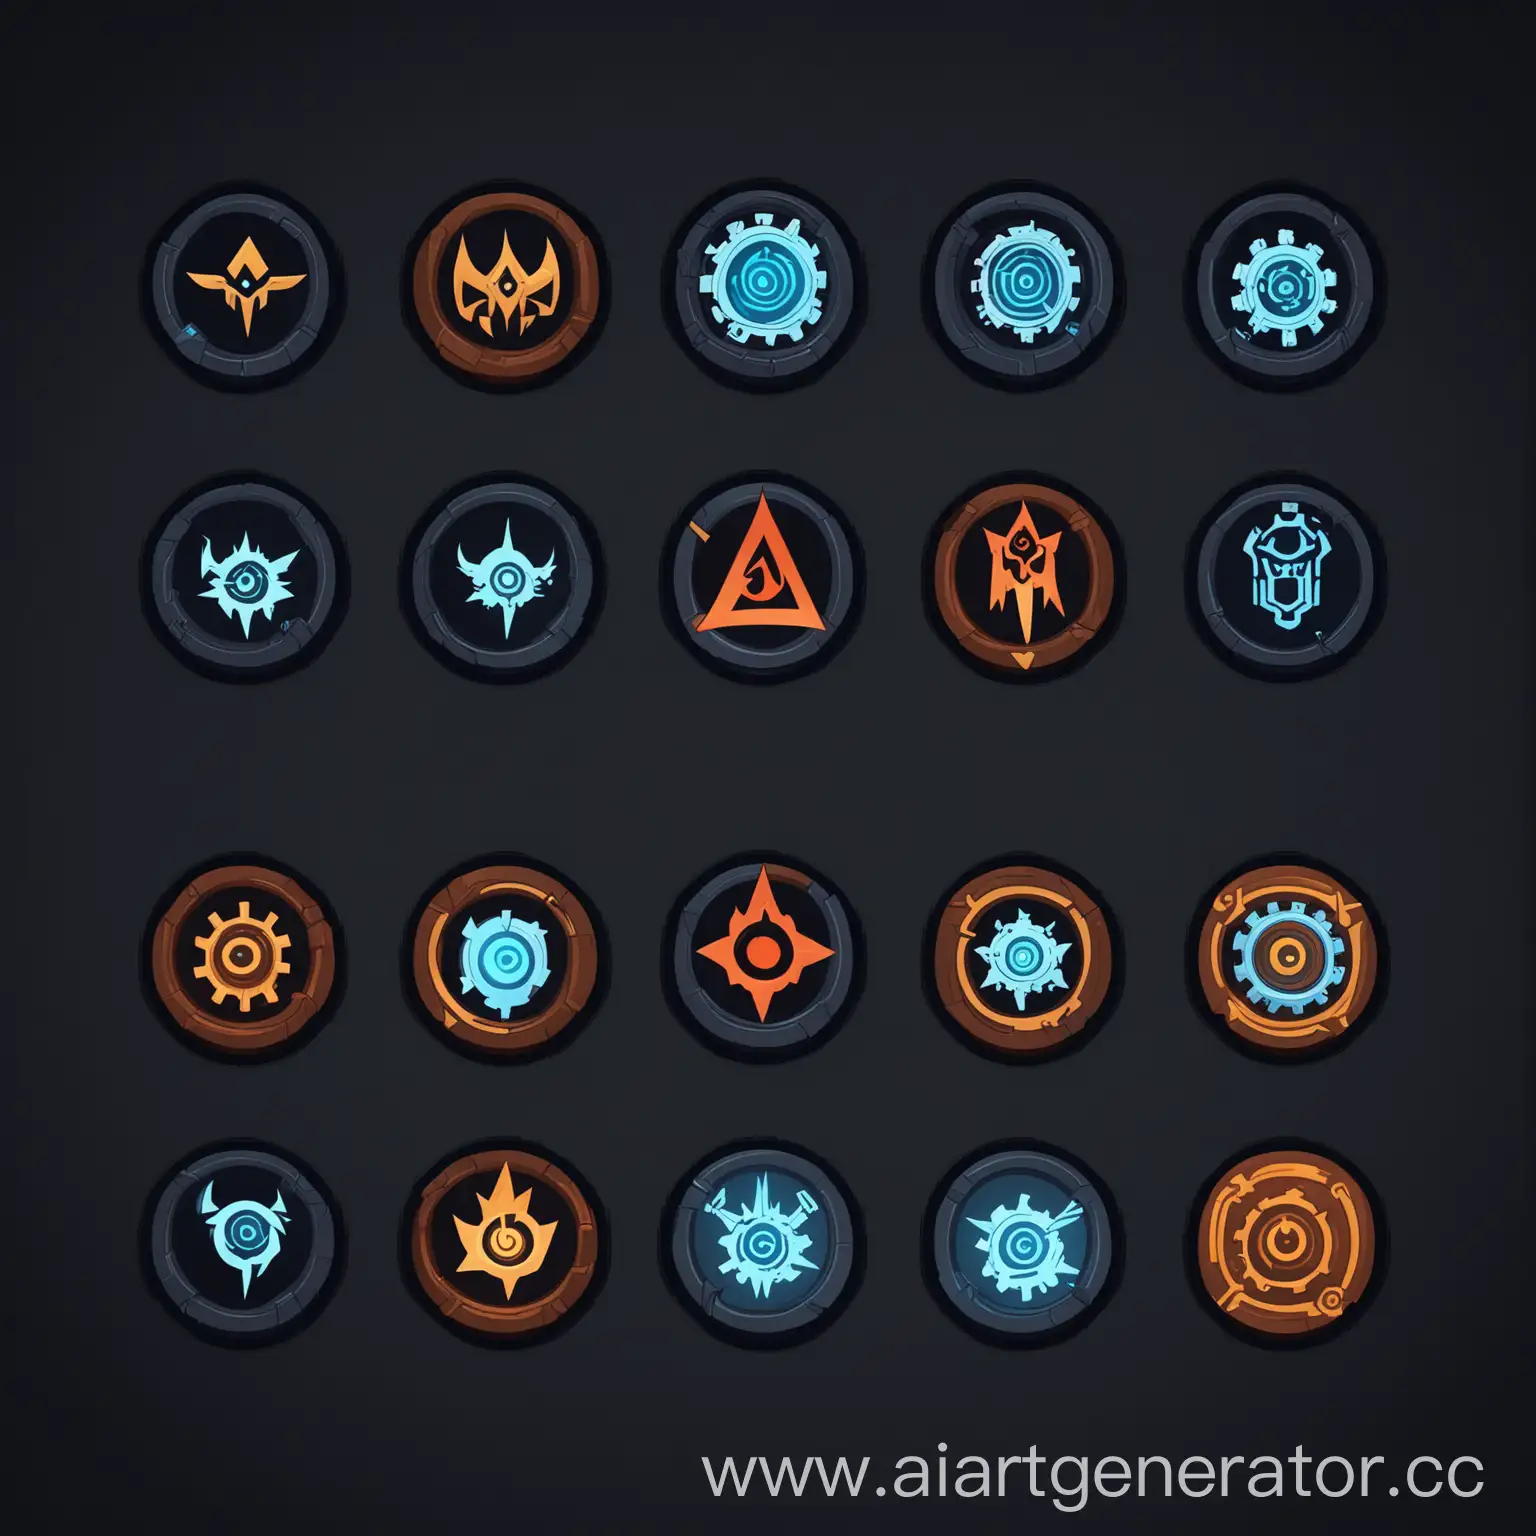 (icon of bots management), (minimalism), (aesthetic), (very smooth contures), (anime style), (dota 2 spell icon style), (settings on the gear), (six icons), (settings style)